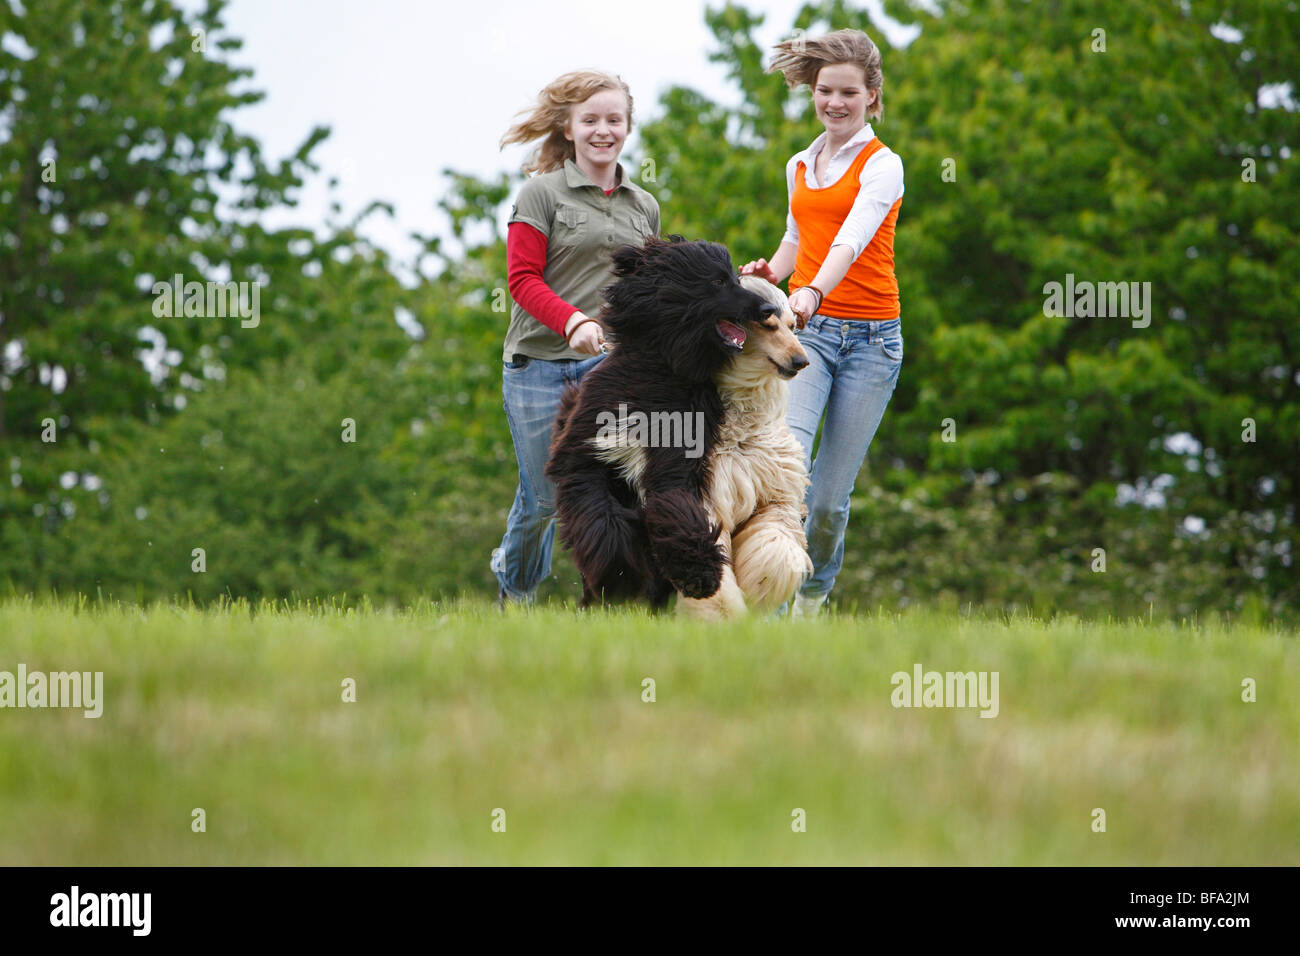 Afghanistan Hound, Afghan Hound (Canis lupus f. familiaris), two girls running over a meadow with two leashed dogs Stock Photo